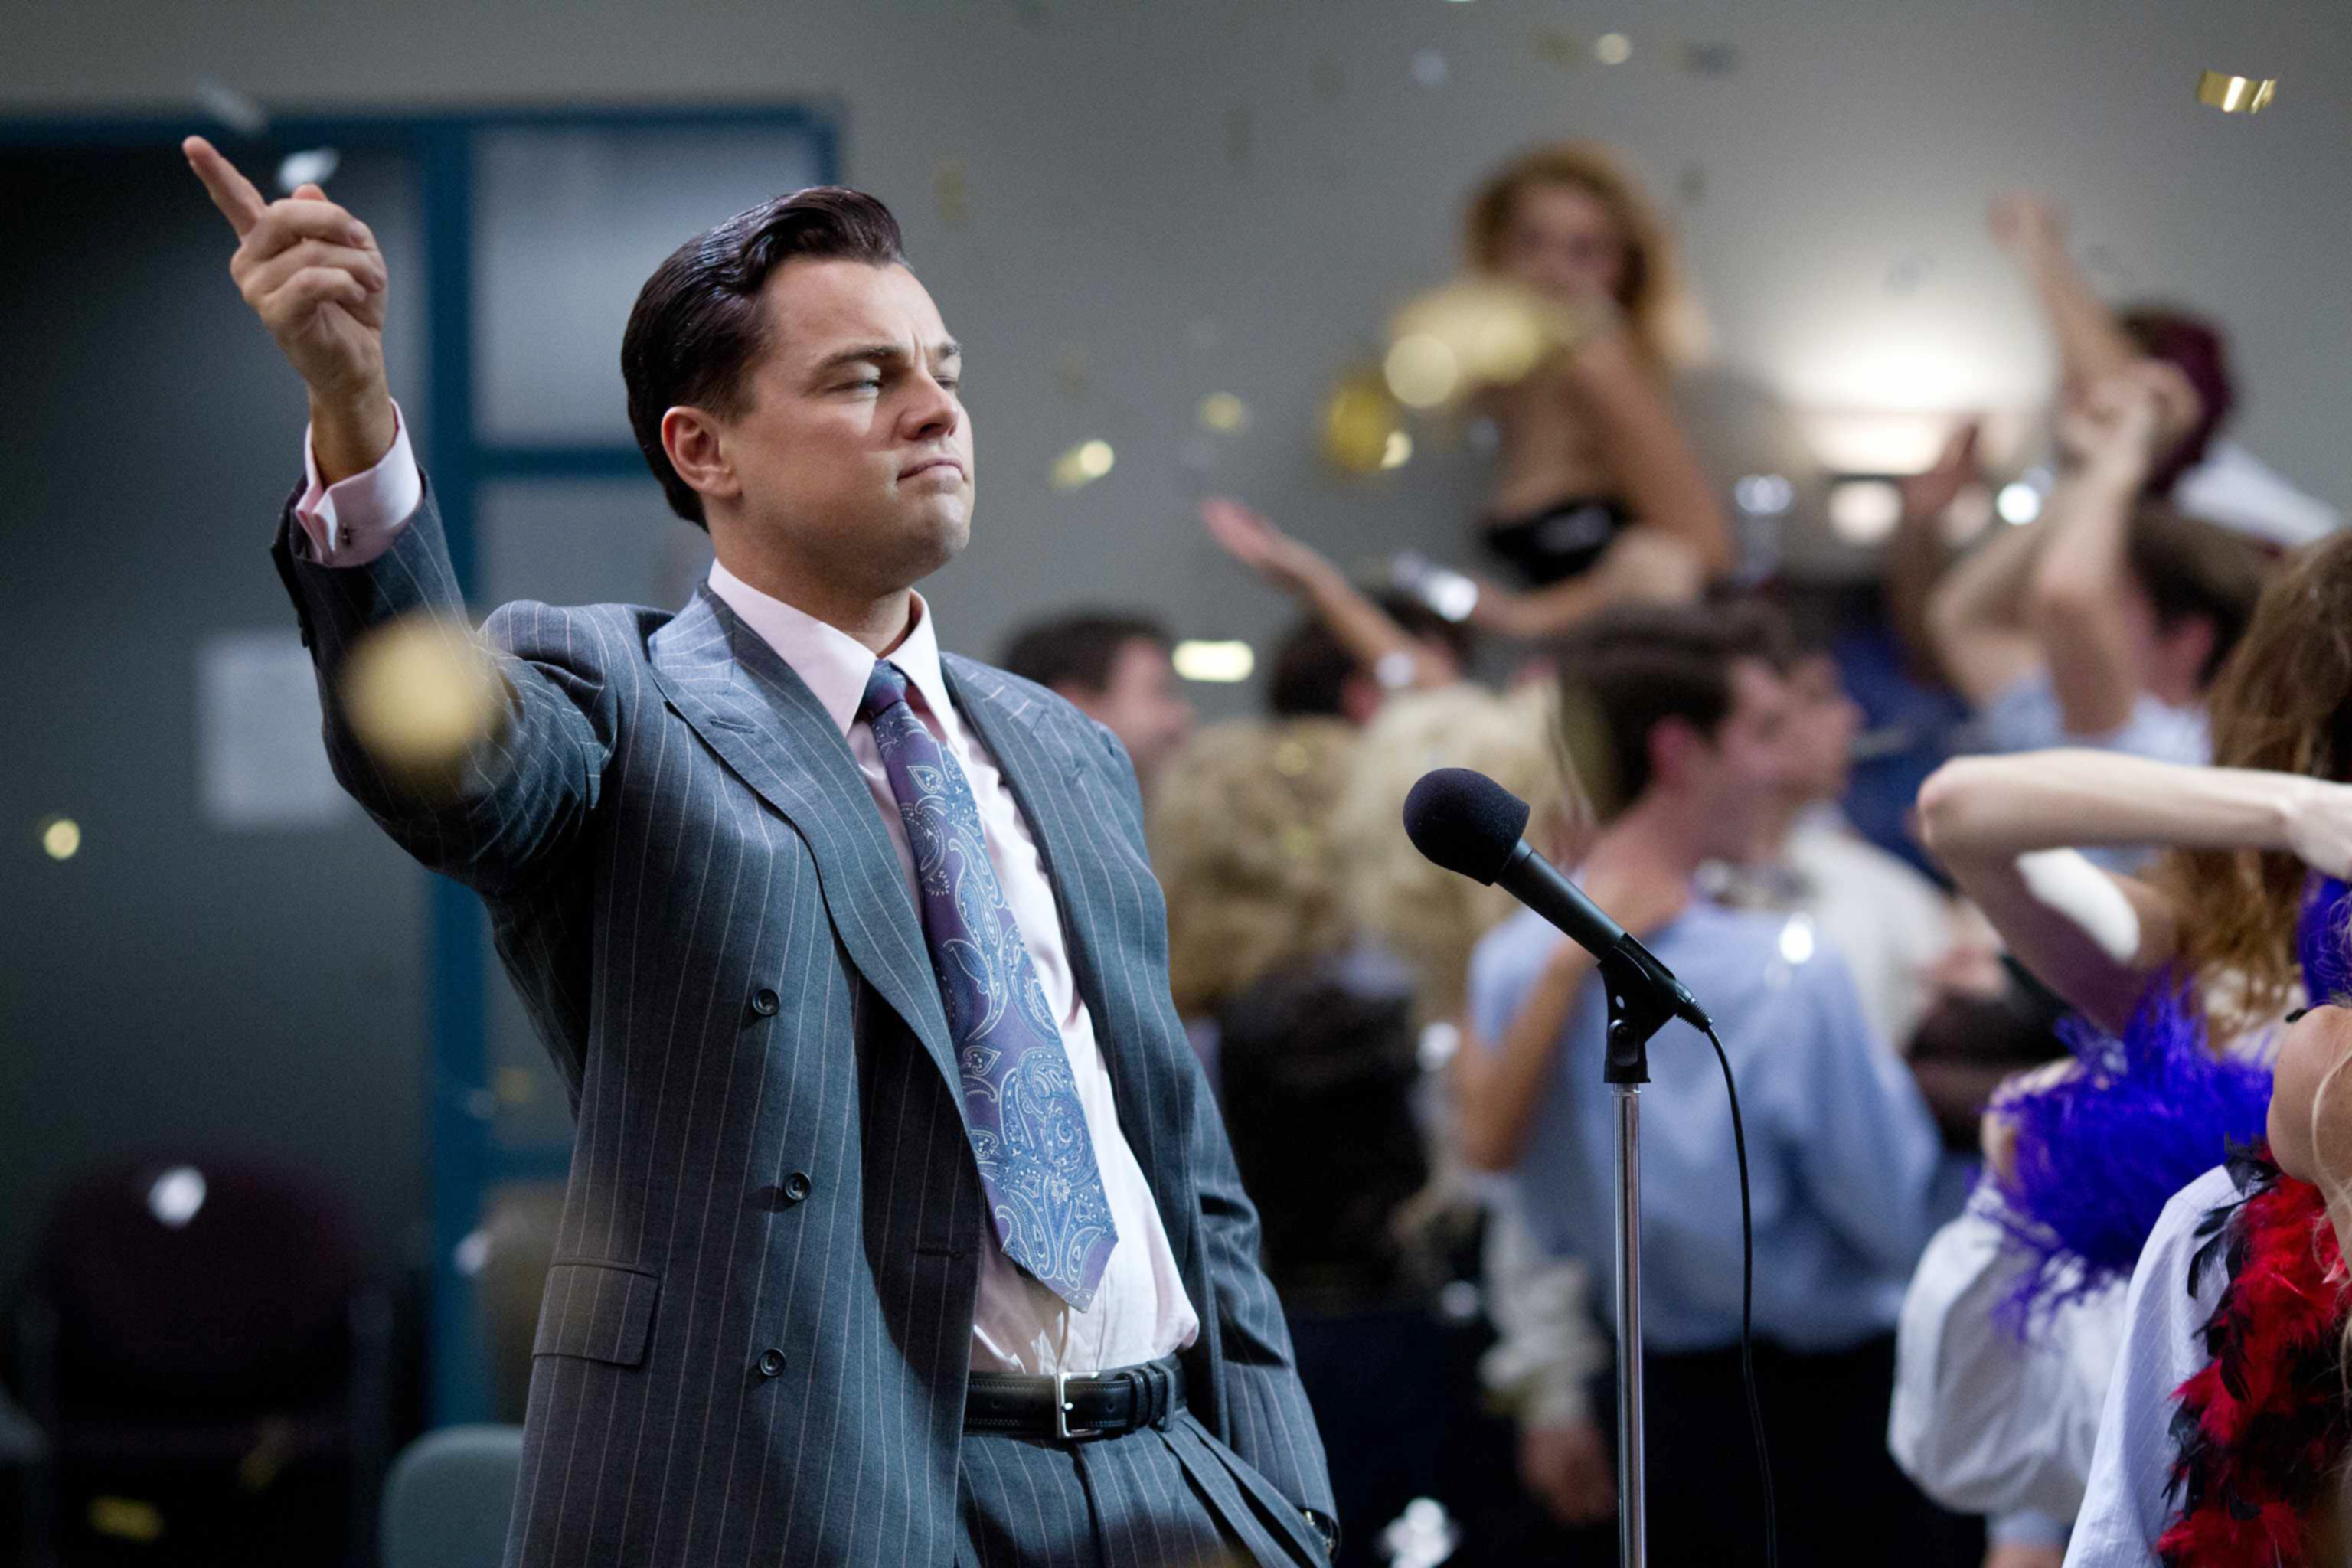 Leonardo DiCaprio as Jordan Belfort in a scene from The Wolf of Wall Street, gesturing triumphantly at a crowded party